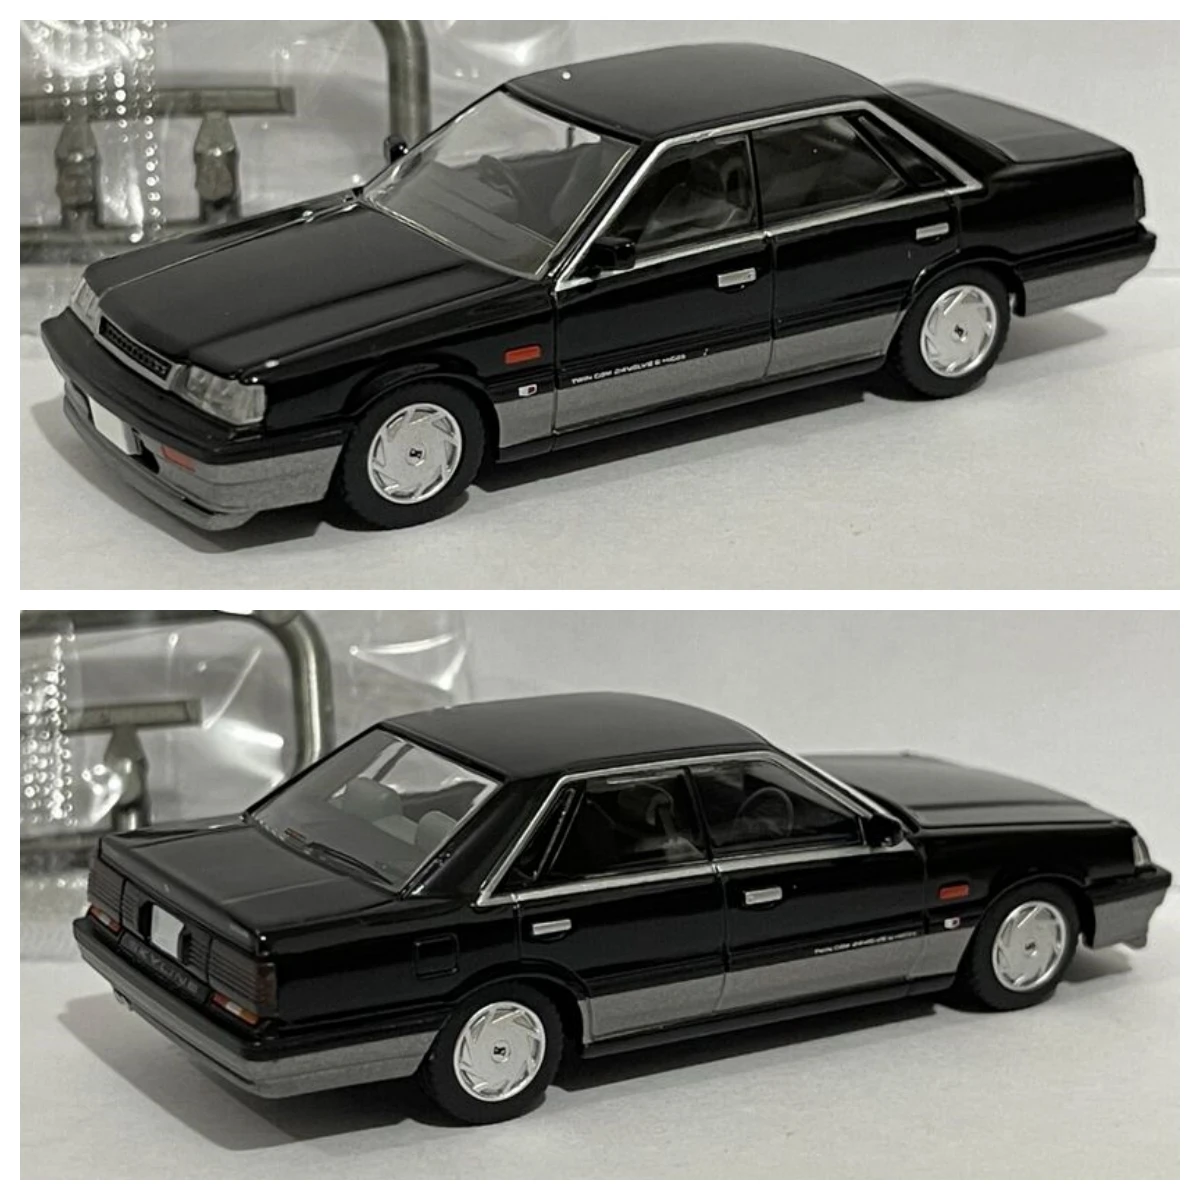 

omica Limited Vintage Neo Tomytec LV-N301b Skyline 4 Door HT GTS 24V 1/64 Diecast Model Car Collection Limited Edition Hobby To